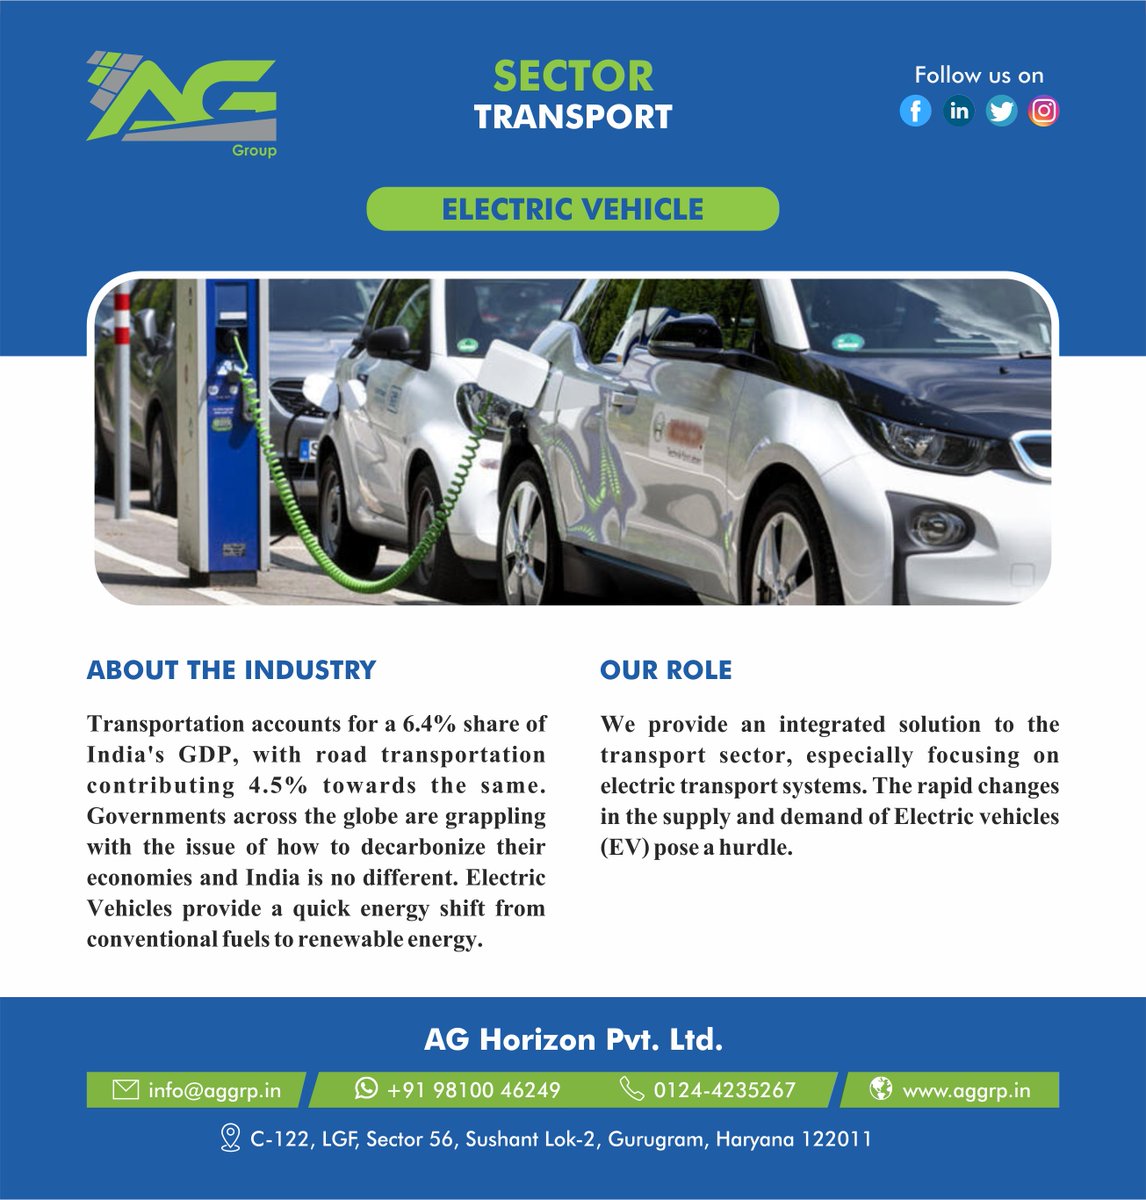 Trade, Commerce and Communication thrive and grow through transport. 

#AGSectors #Transport #ElectricVehicle #Railway #Ropeway #TrafficManagement #AGService #ServicesofConsulting #AGHorizon #Pmc #Consulting #Advisory #Consultancyexpert #consultancyinindia #managementconsultancy